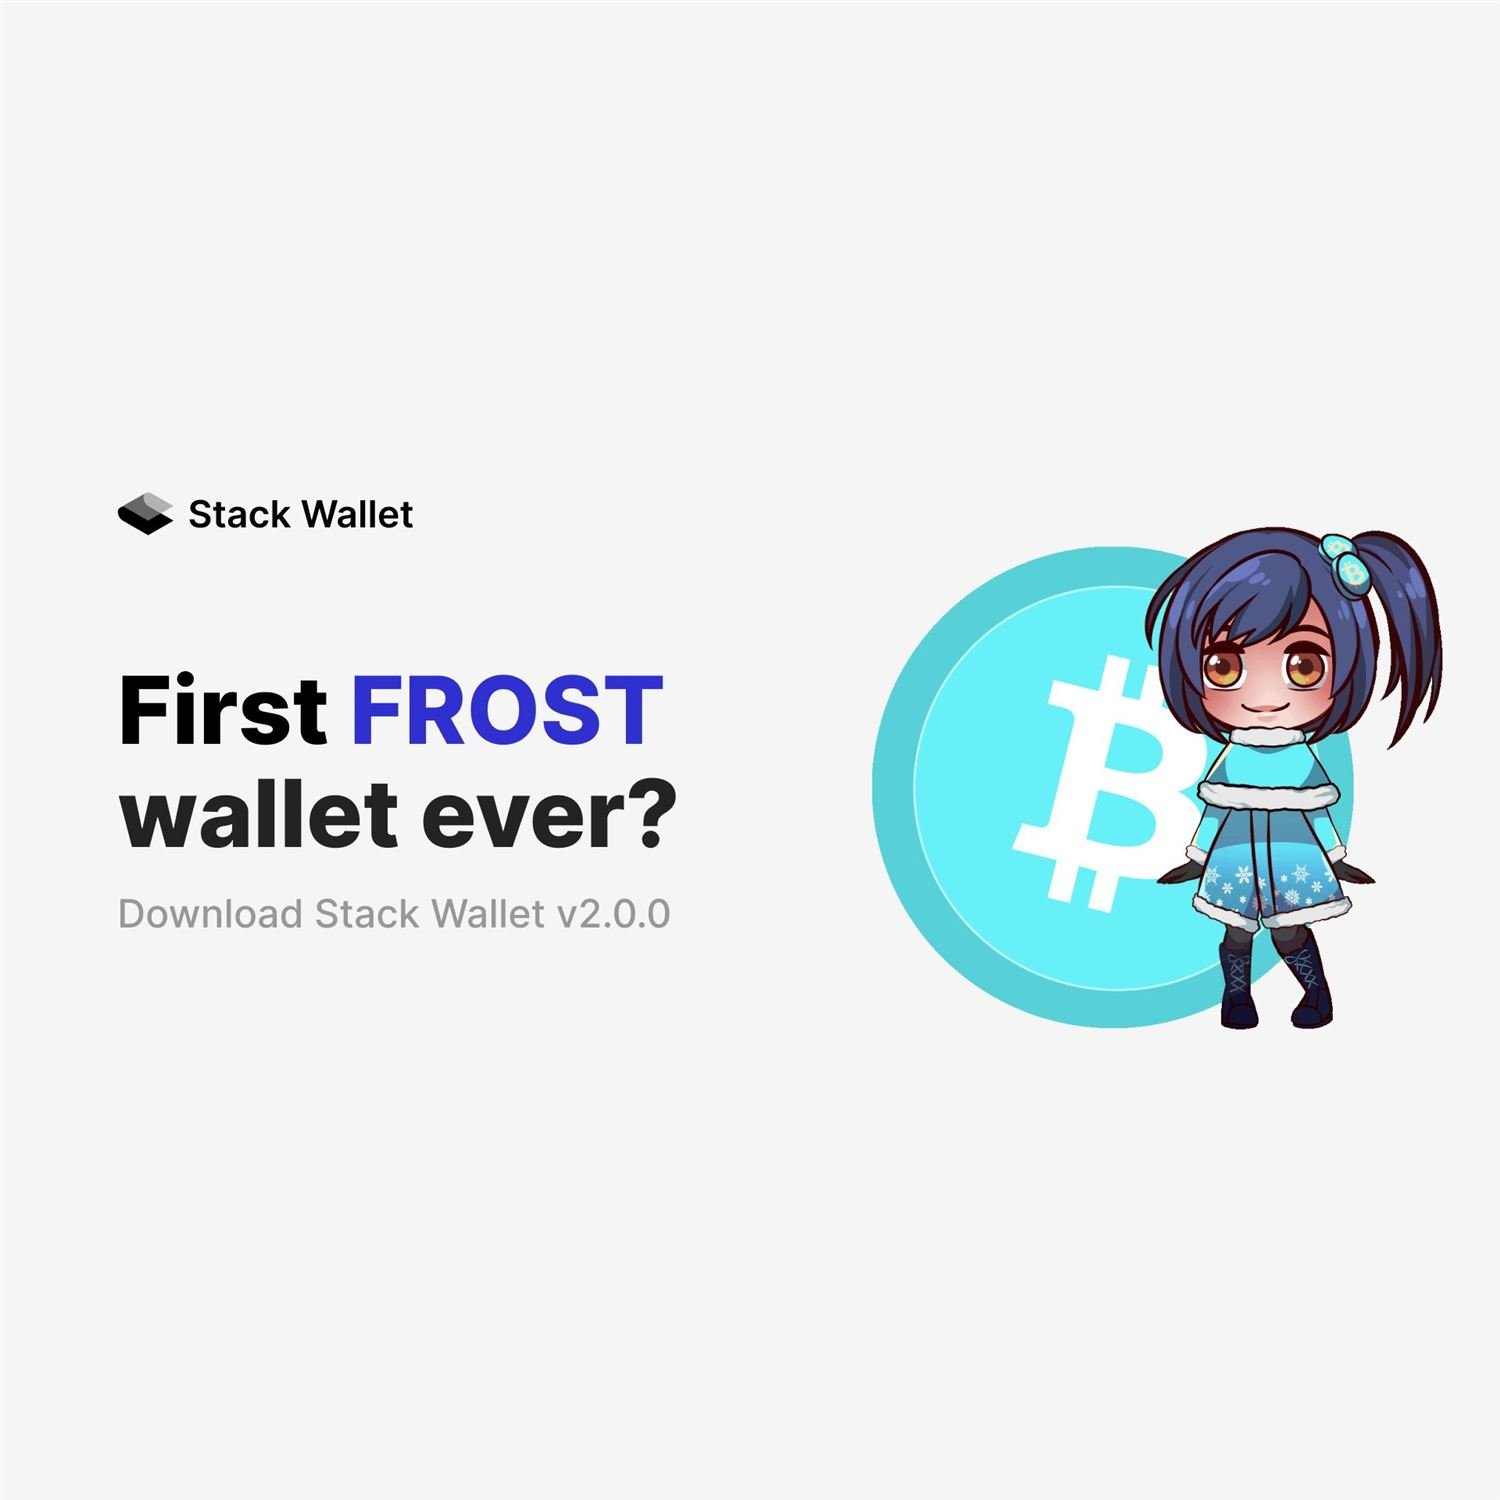 Stack Wallet Gets FROSTY